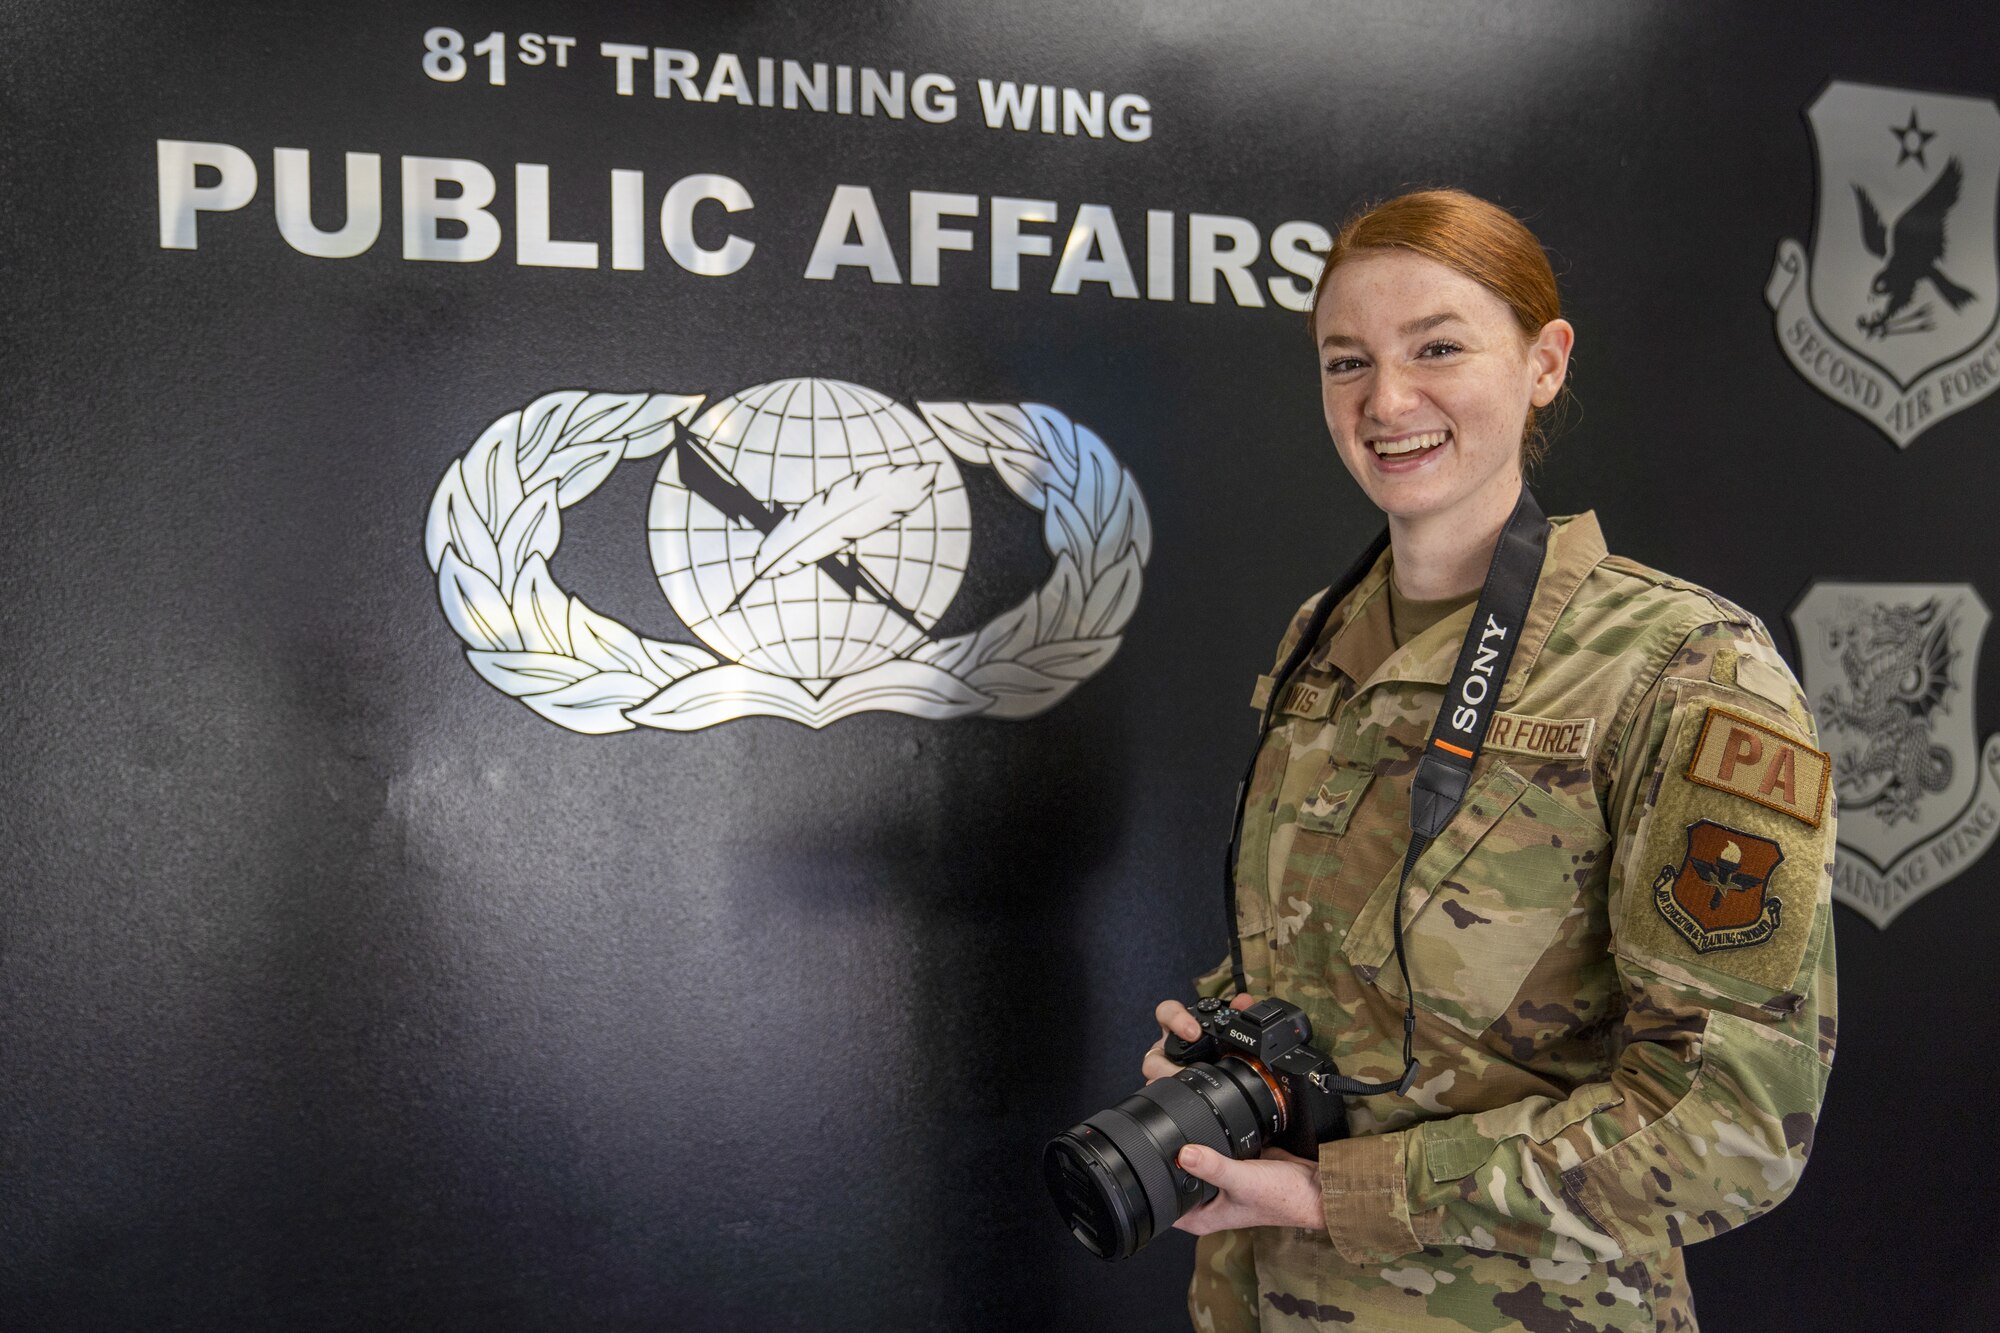 An Airman stands in front of a wall smiling and holding a camera.